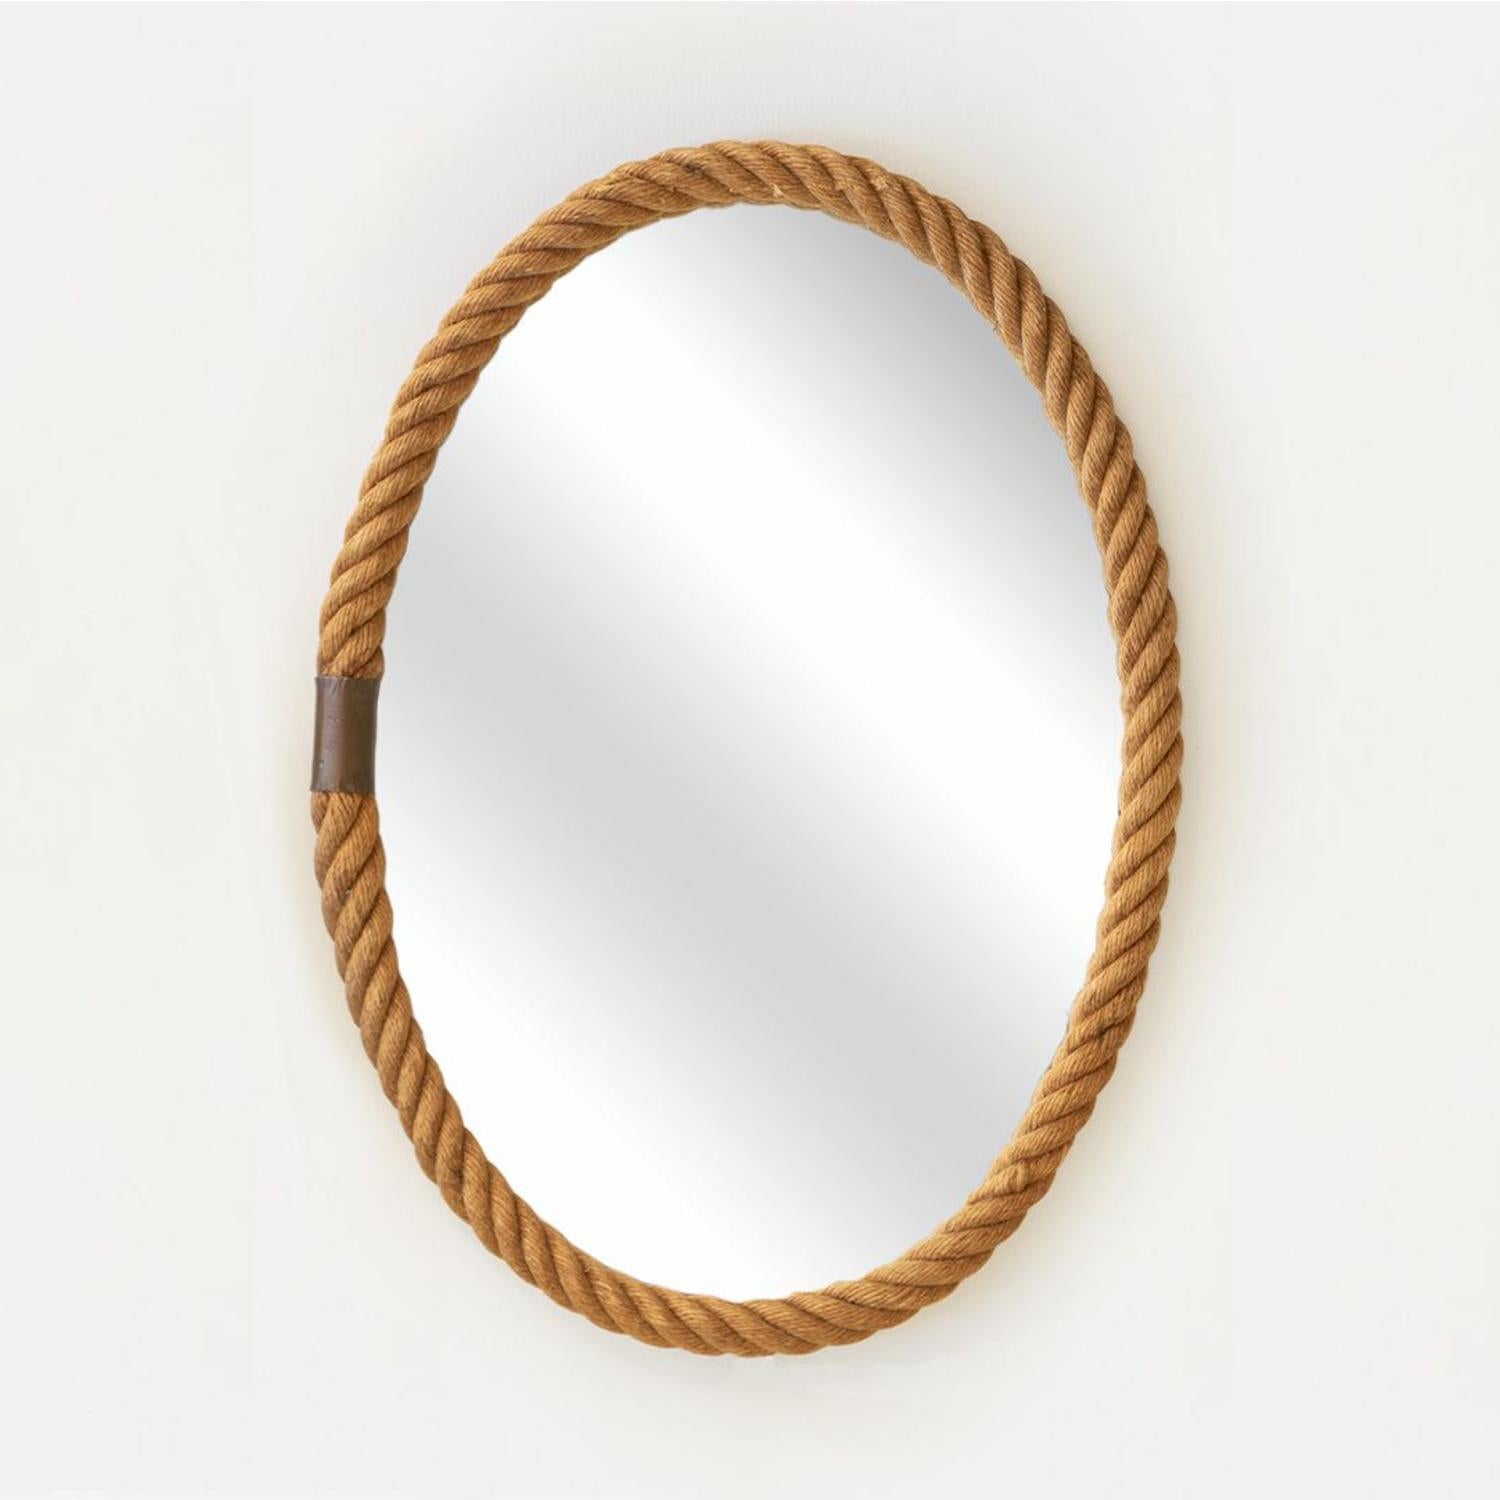 Stunning large scale oval wall mirror with thick twisted rope frame and brass detail. Original mirror in good vintage condition. By Adrien Audoux and Frida Minet from France, 1940's. Perfect for a primary bath or powder room. One available, sold